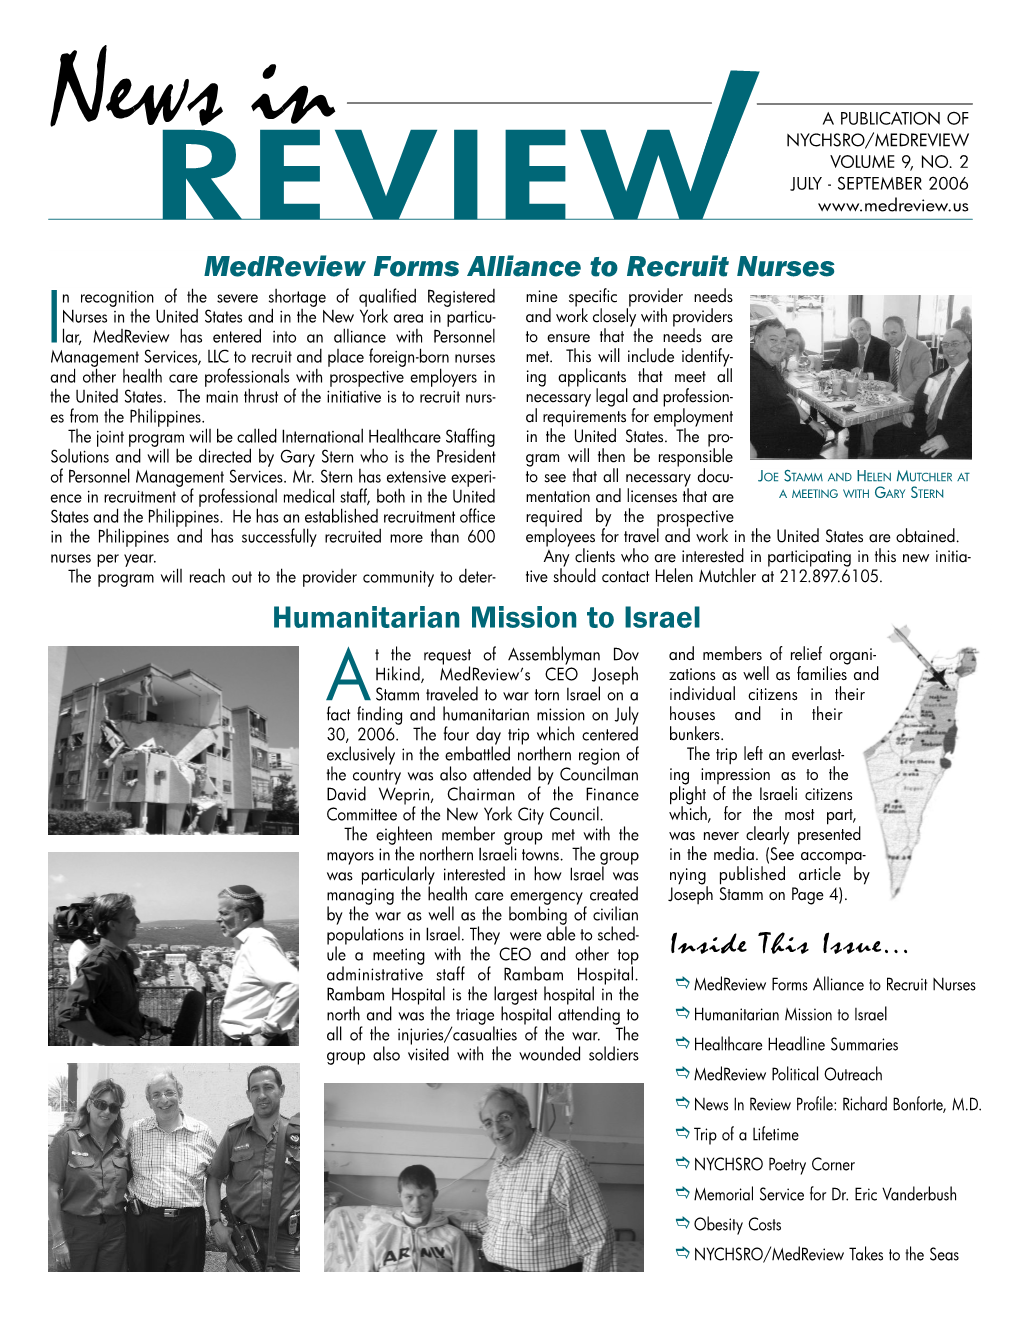 NYCHSRO Medreview Newsletter Vol. 9 No. 2 July – Sept. 2006